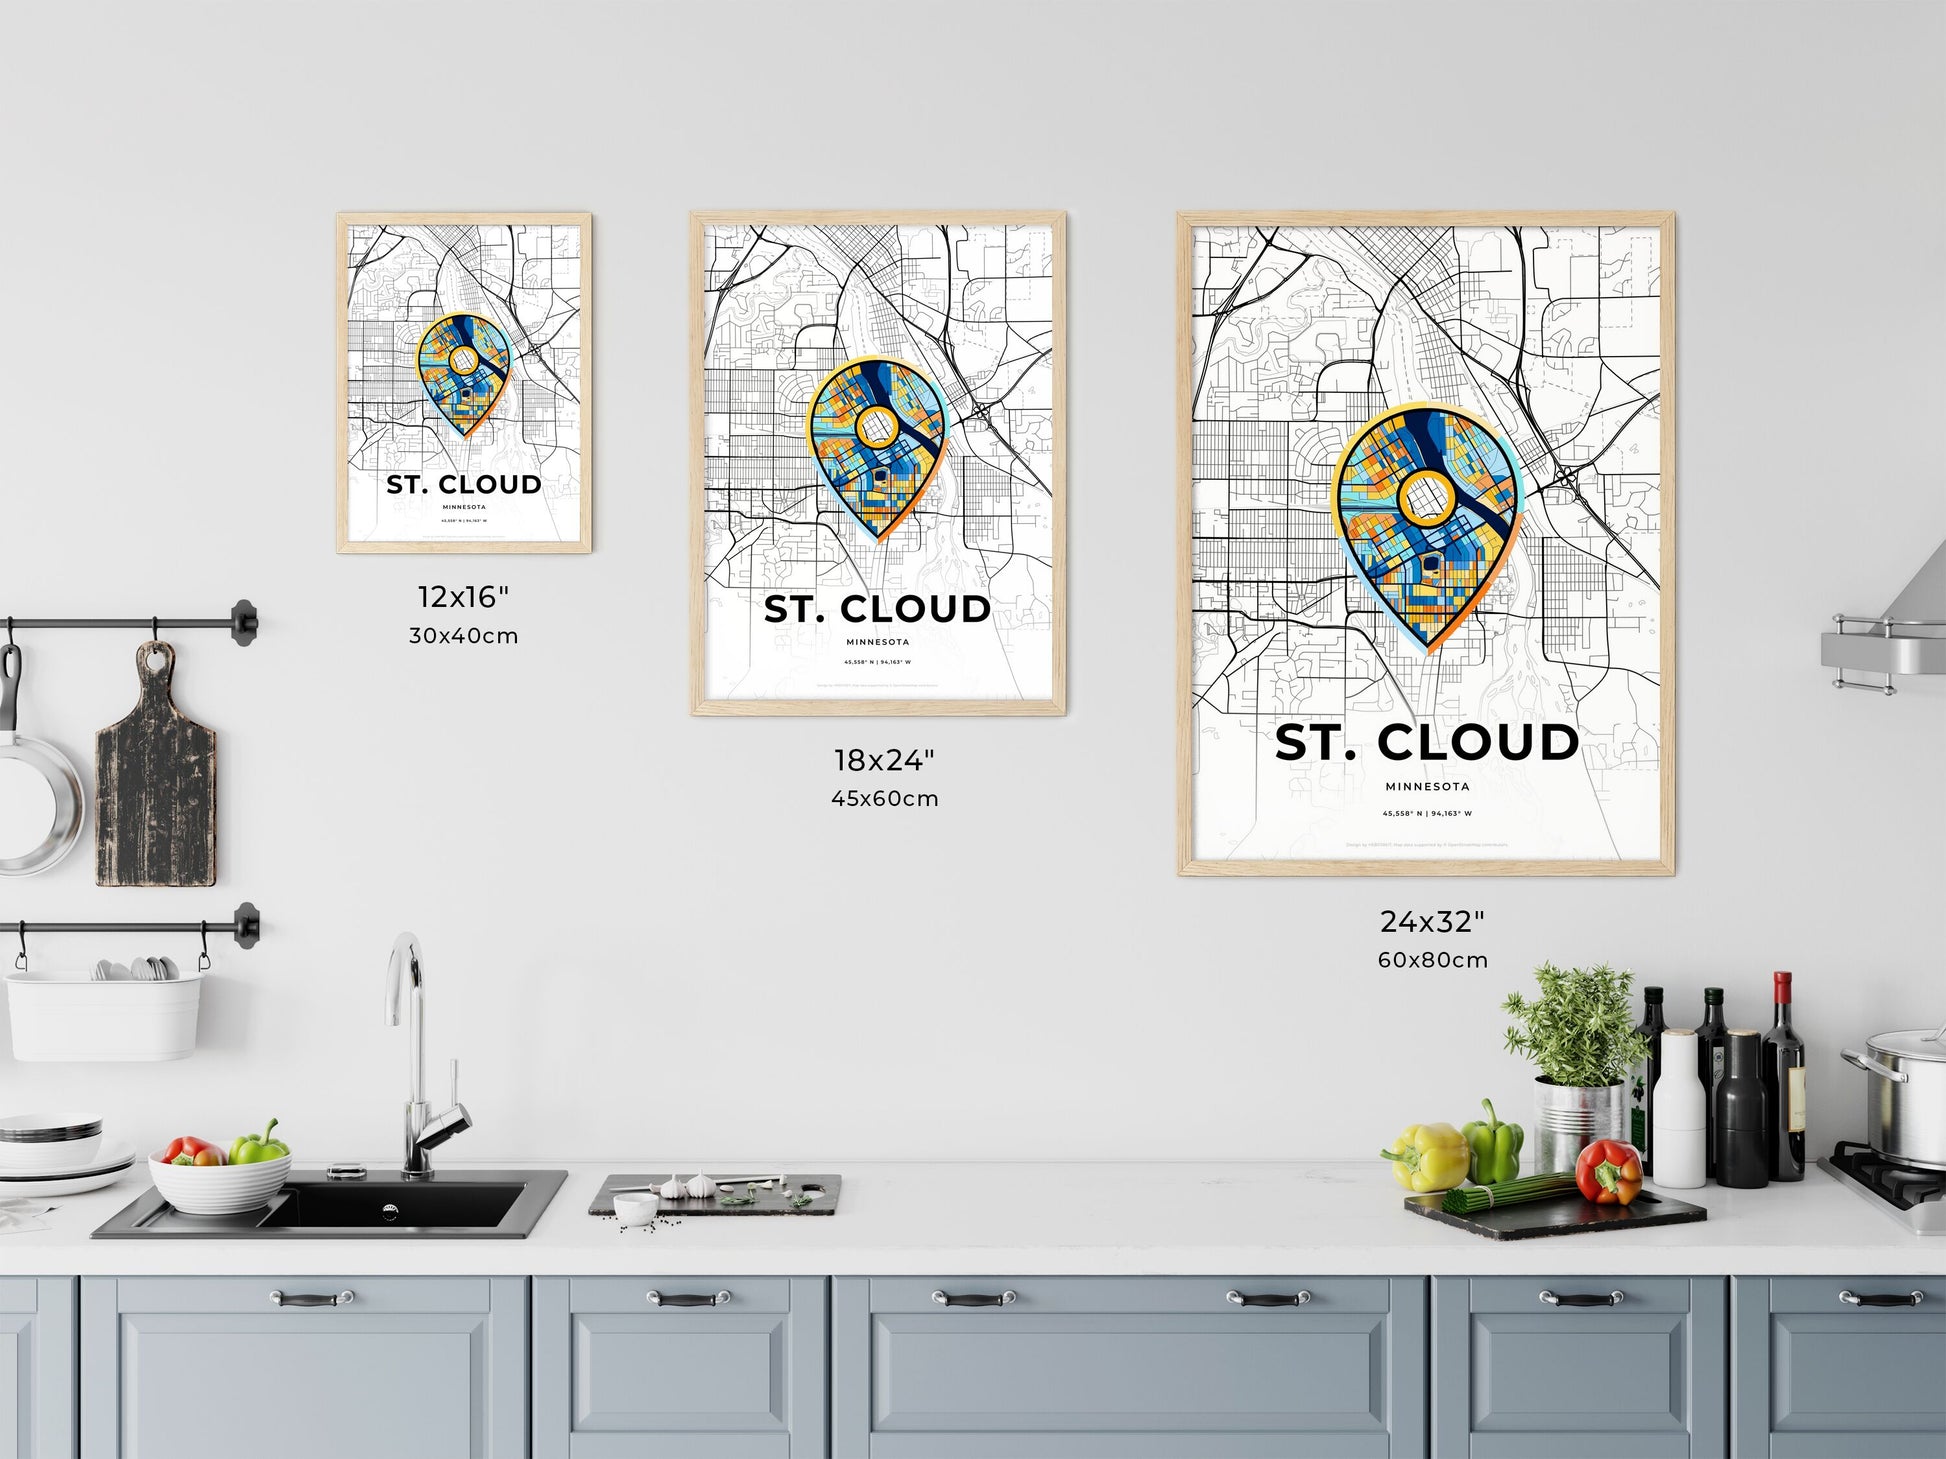 ST. CLOUD MINNESOTA minimal art map with a colorful icon. Where it all began, Couple map gift.